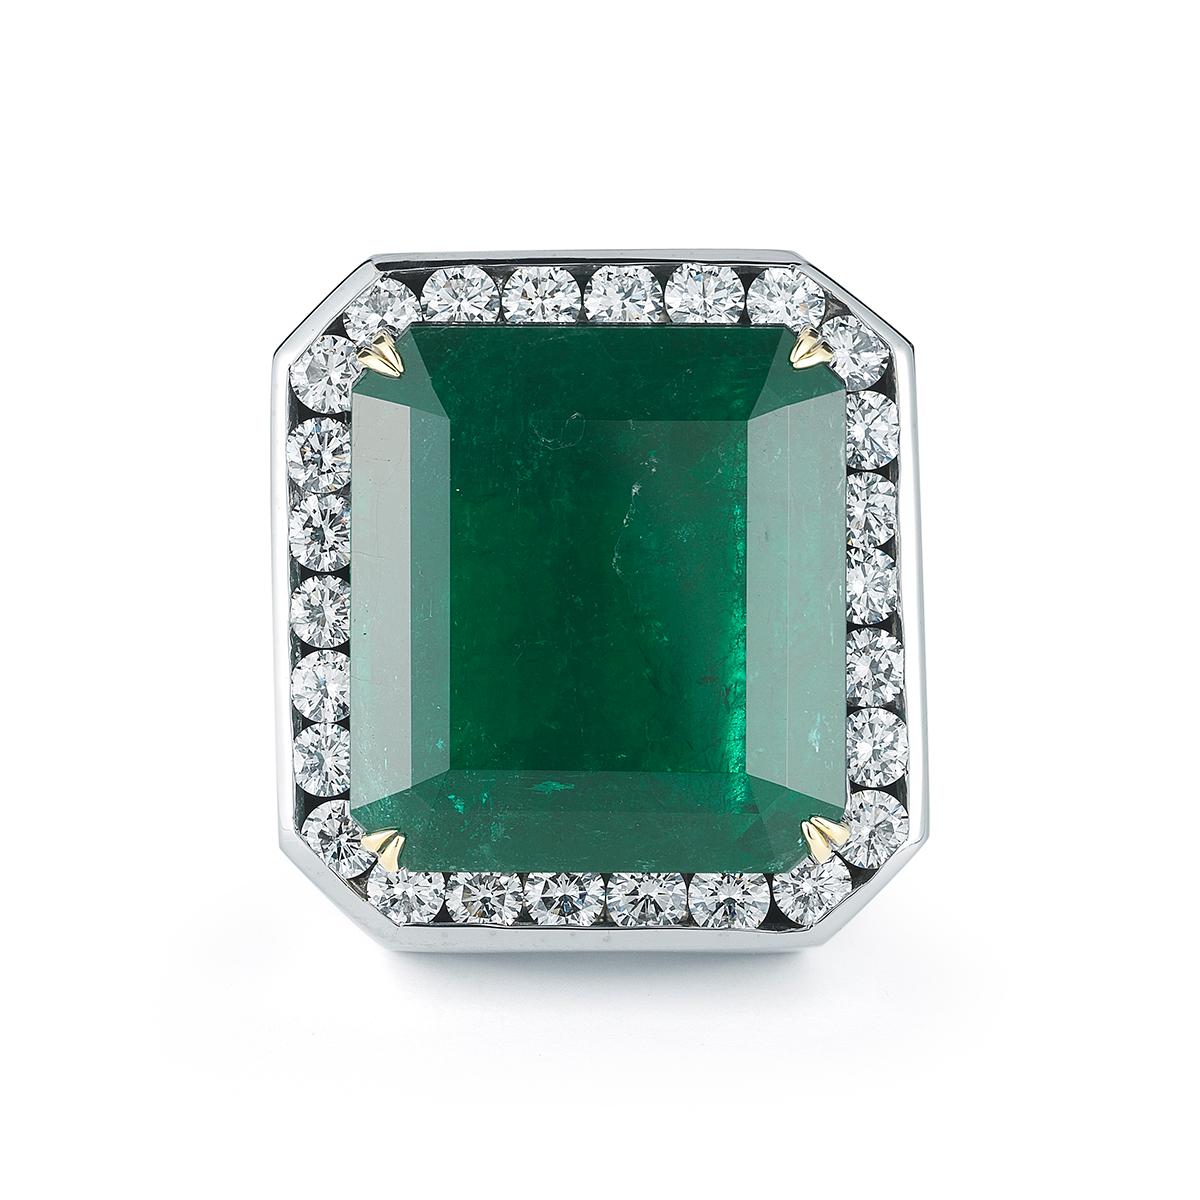 STRIKING EMERALD MENS RING BY RAYAZTAKAT
An impressive architectural white gold setting with diamond halo for the most discerning gentleman.
Item:	# 01827
Metal:	18k W
Lab:	Gia
Color Weight:	44.82 ct.
Diamond Weight:	4.56 ct.
